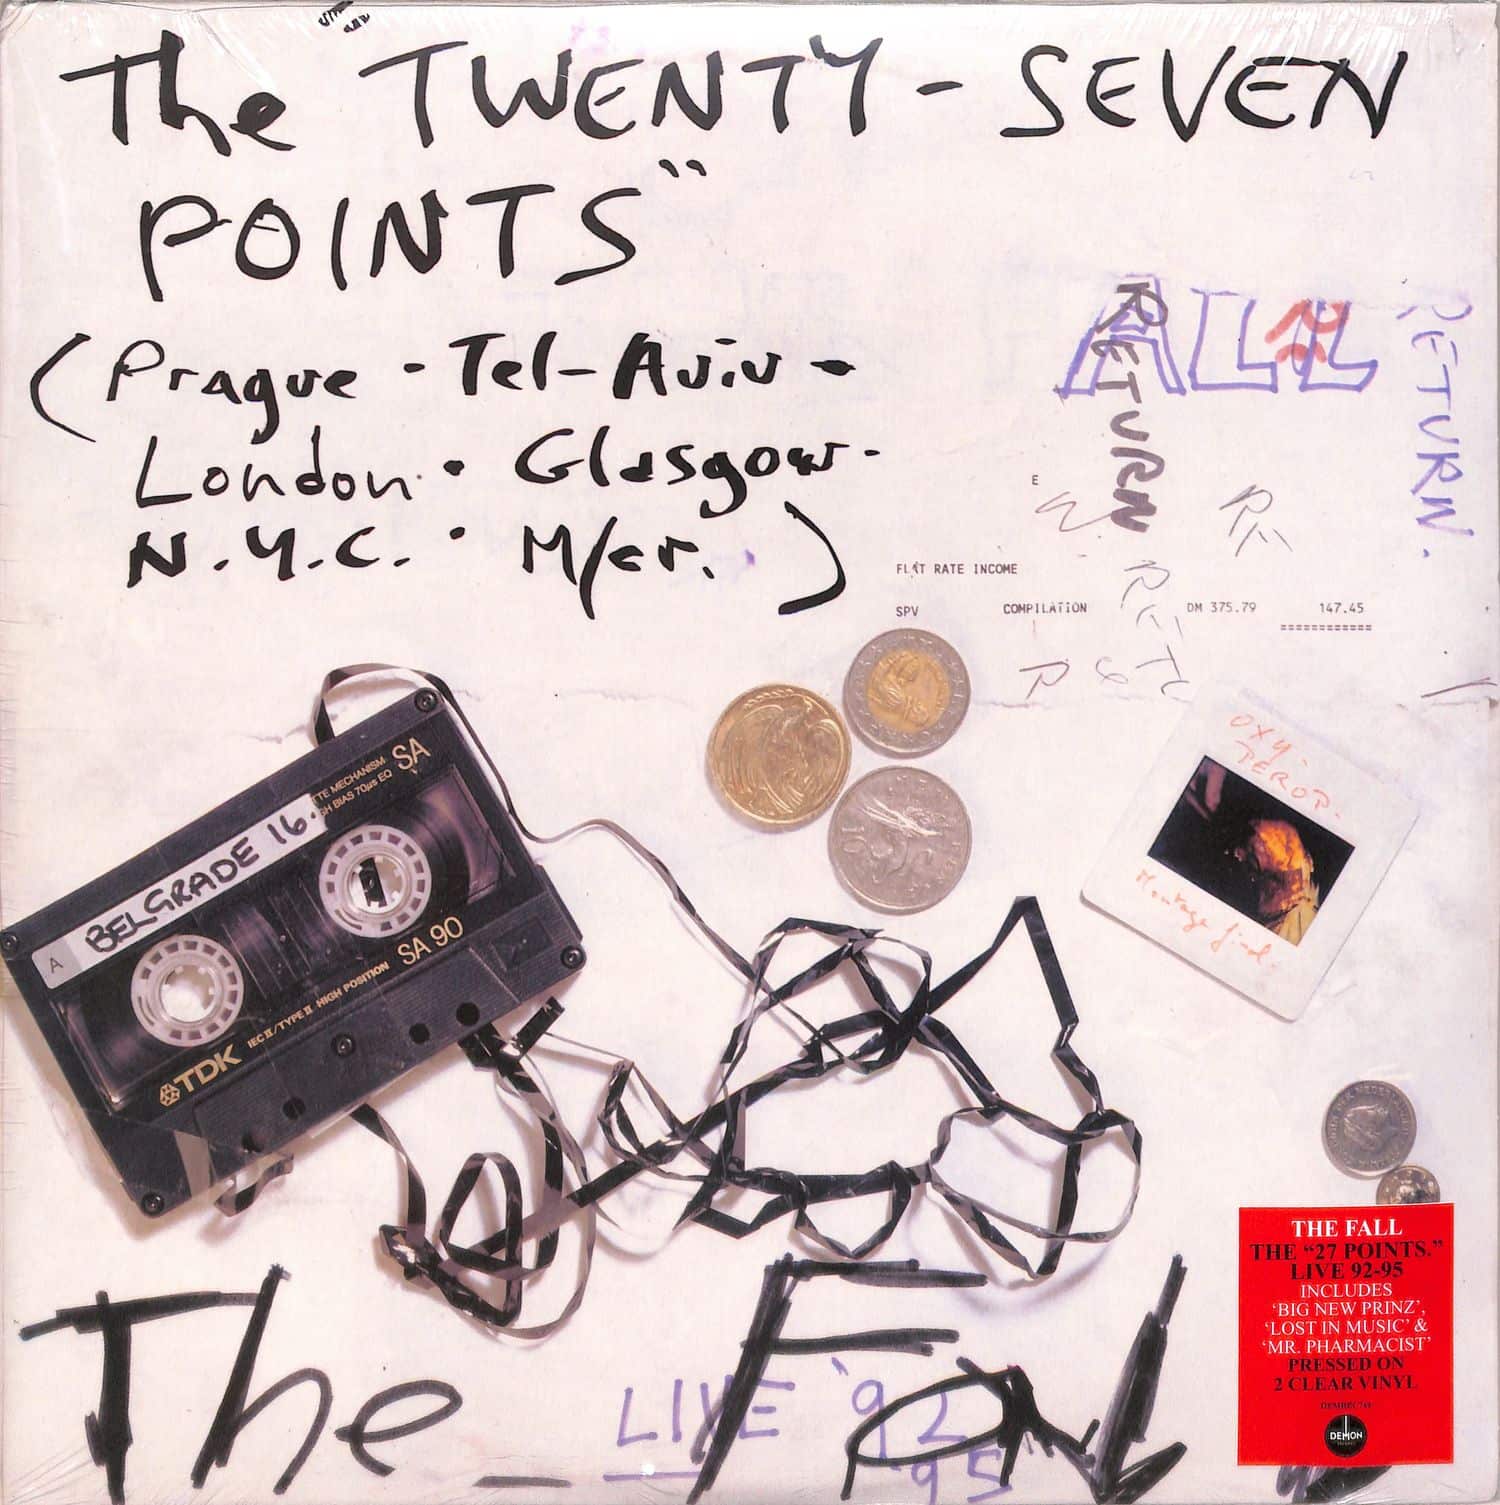 The Fall - THE TWENTY-SEVEN POINTS 